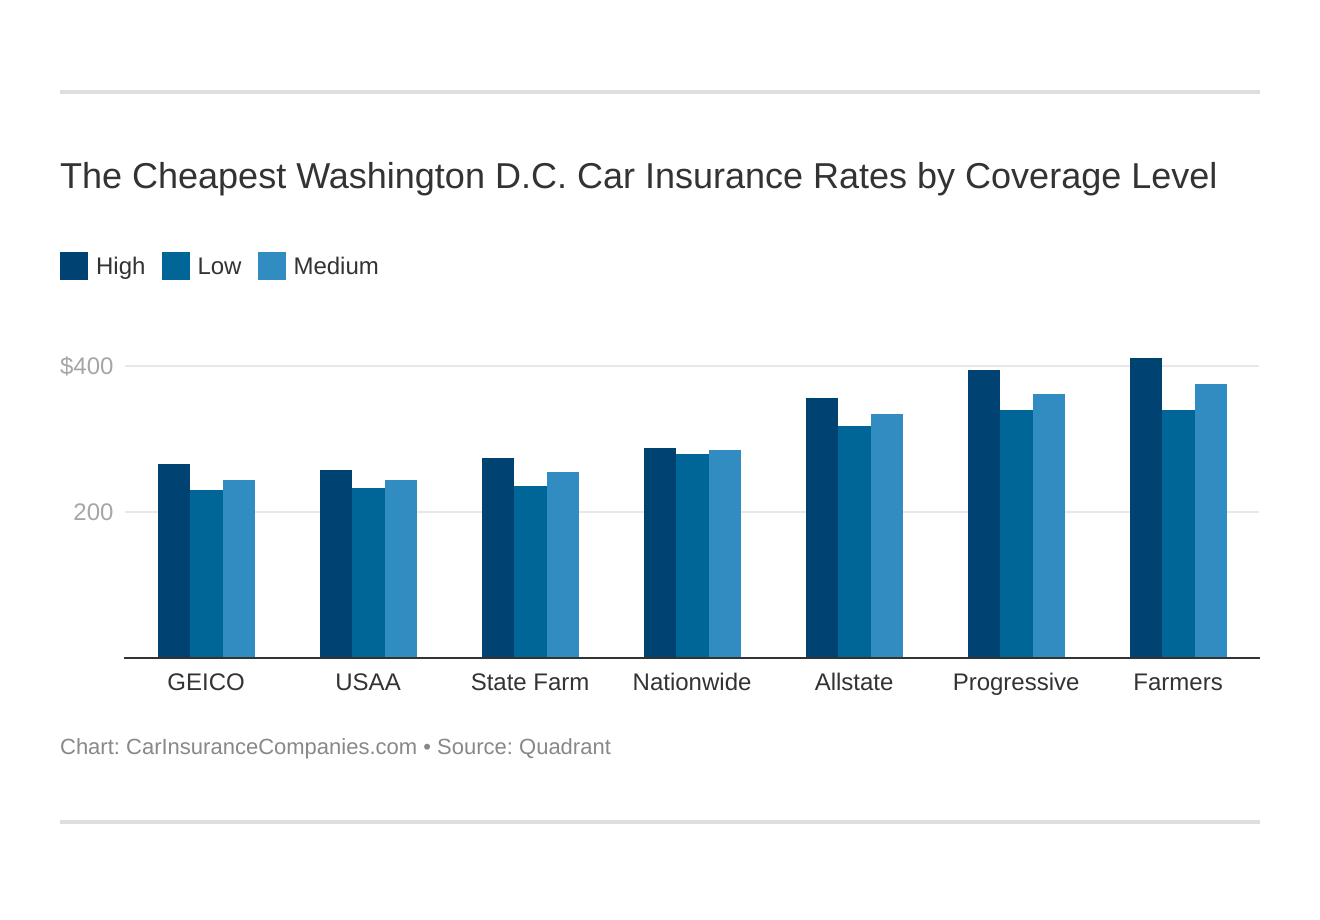 The Cheapest Washington D.C. Car Insurance Rates by Coverage Level